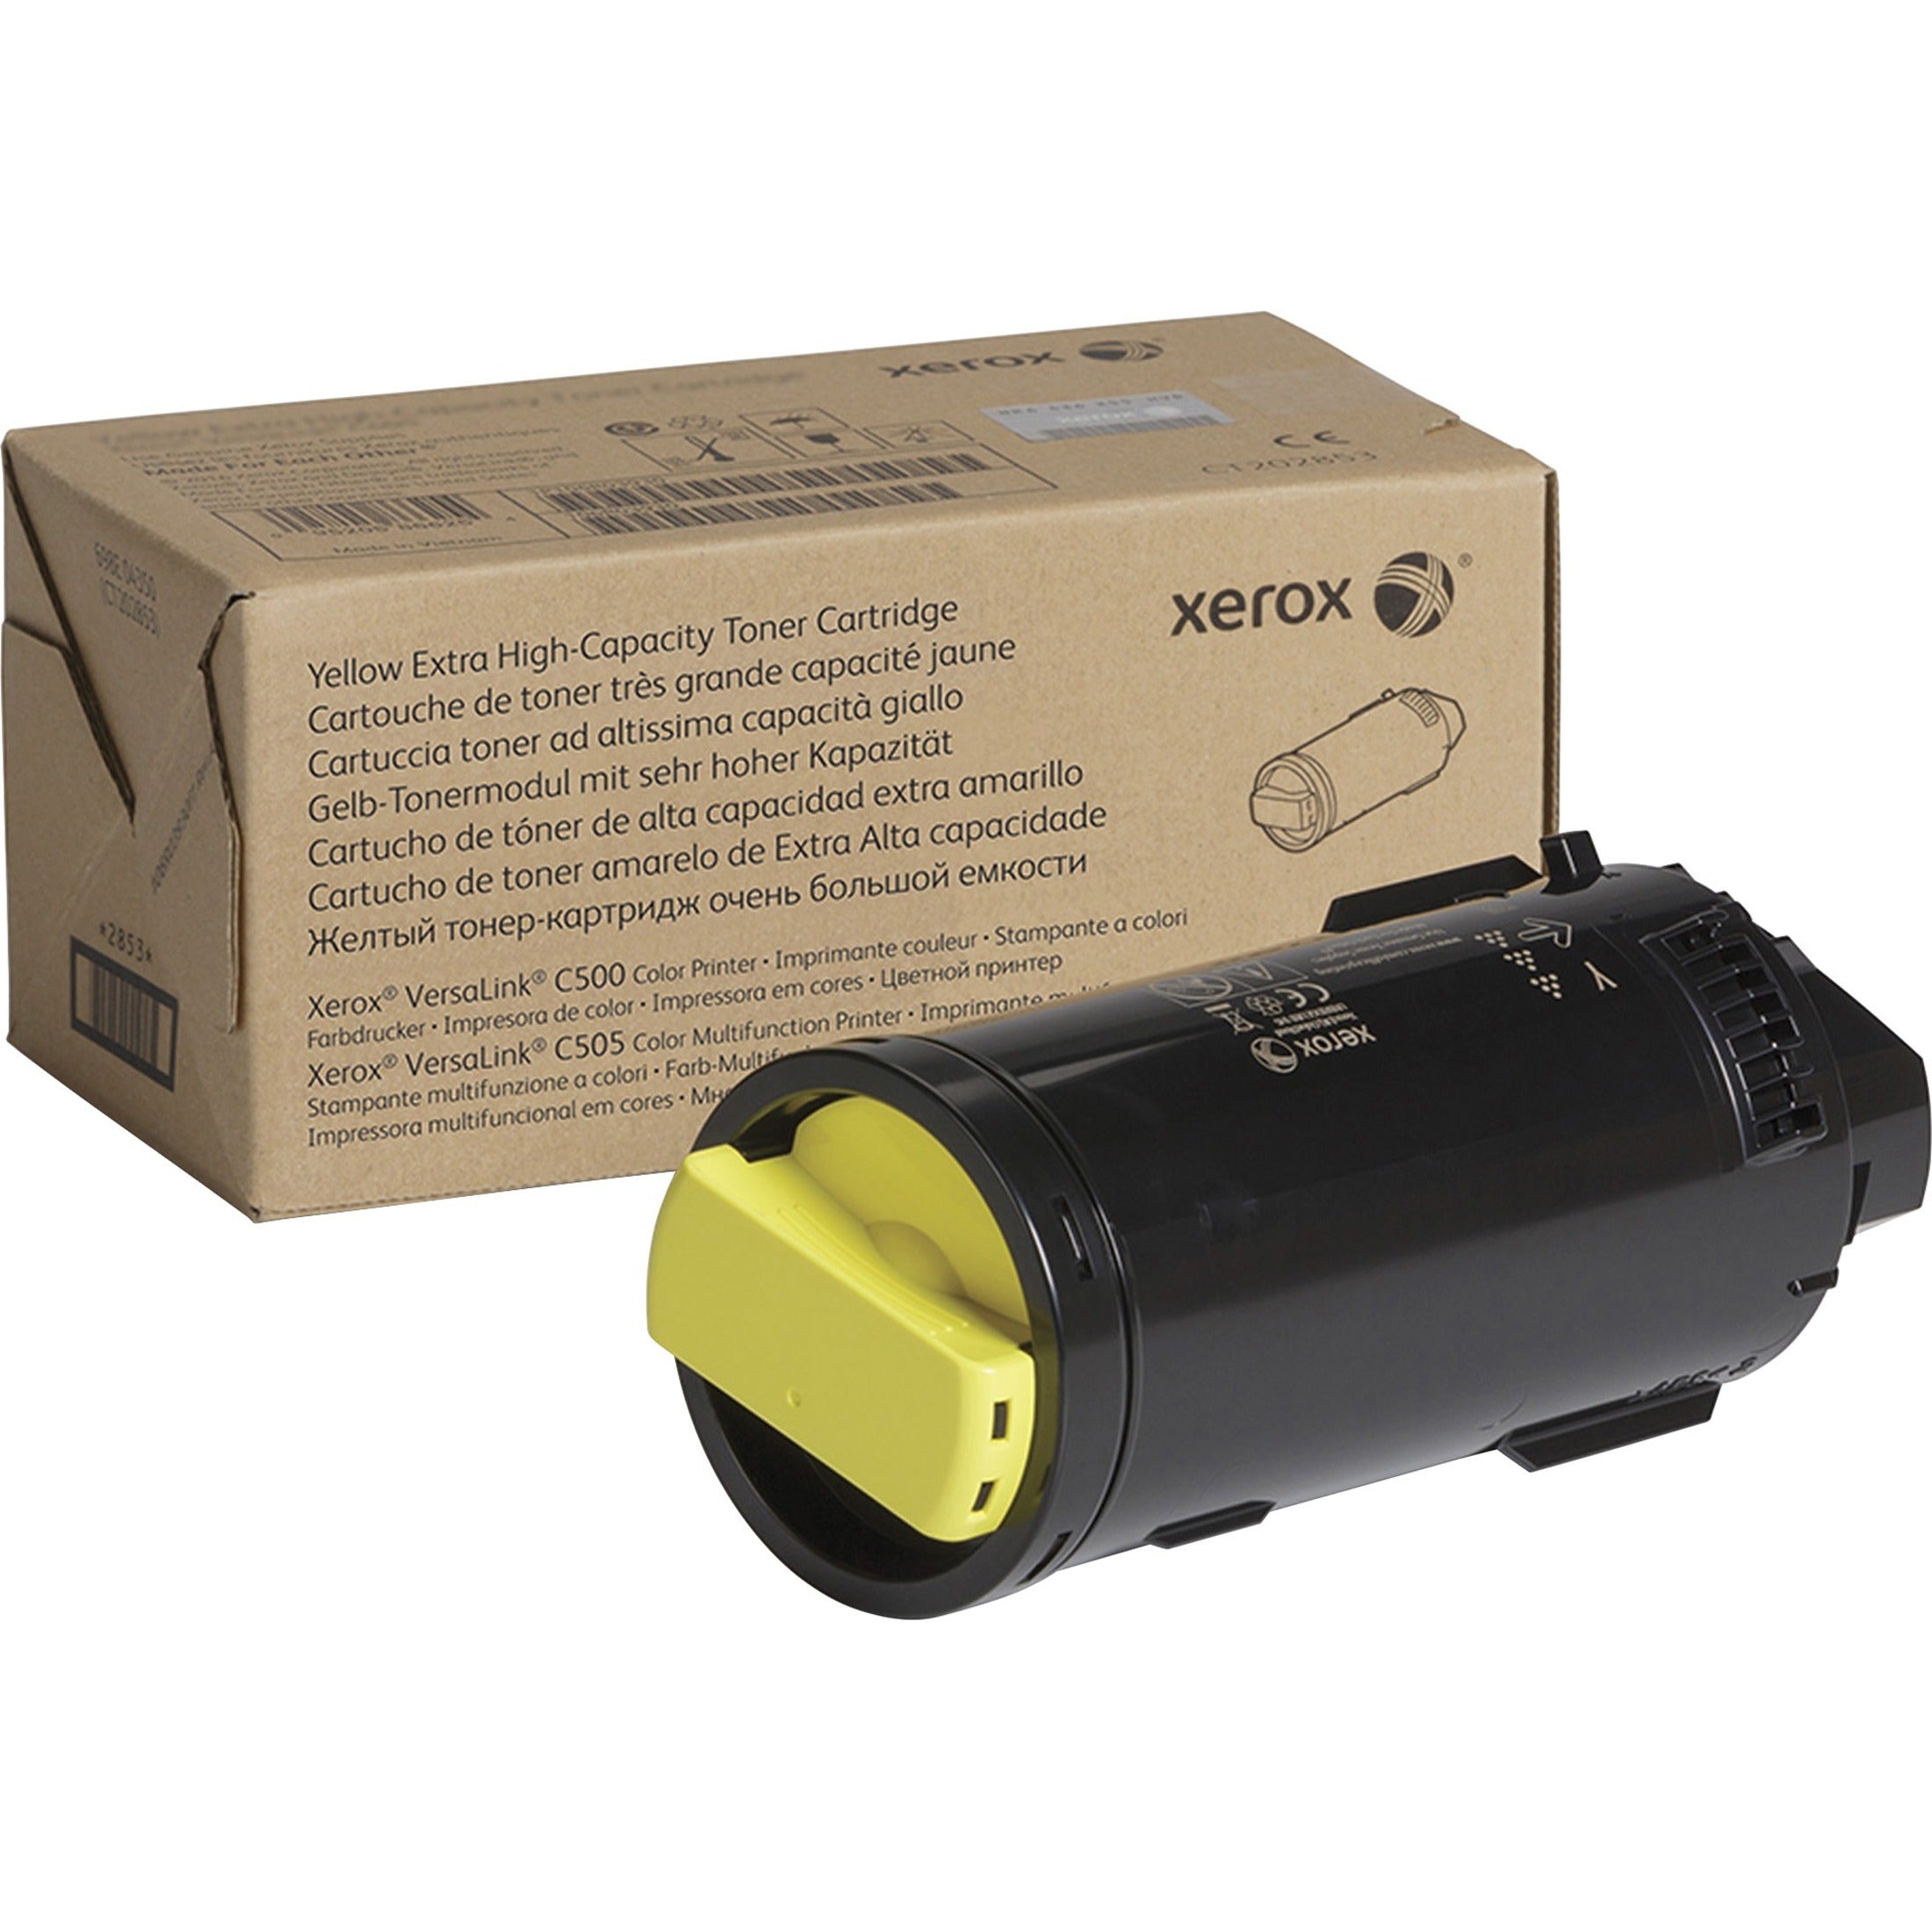 Xerox 106R03868 Genuine Yellow Extra High Capacity Toner Cartridge For The VersaLink C500/C505, 9,000 Pages Yield